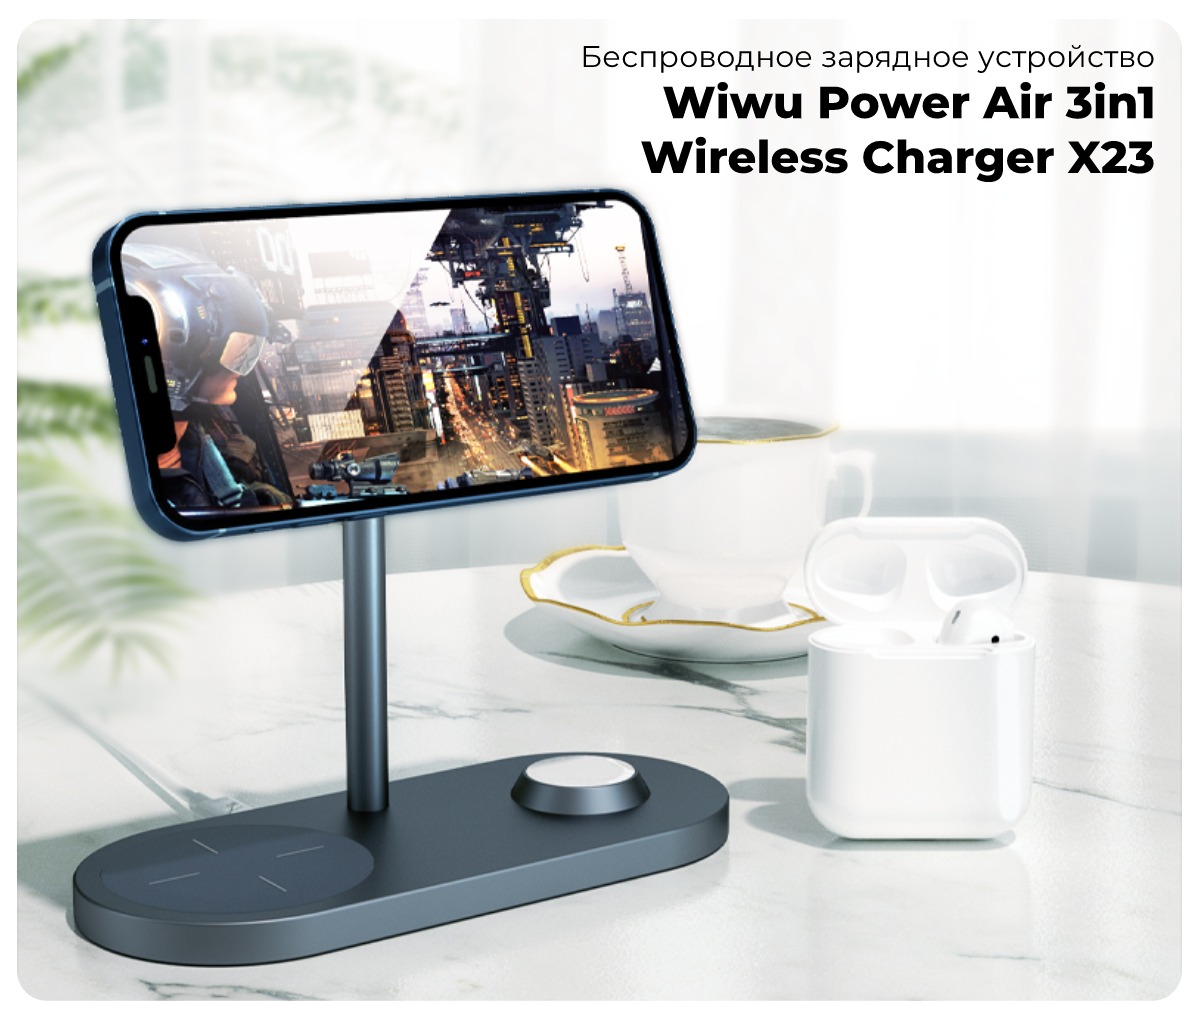 Wiwu-Power-Air-3-in-1-Wireless-Charger-X23-01